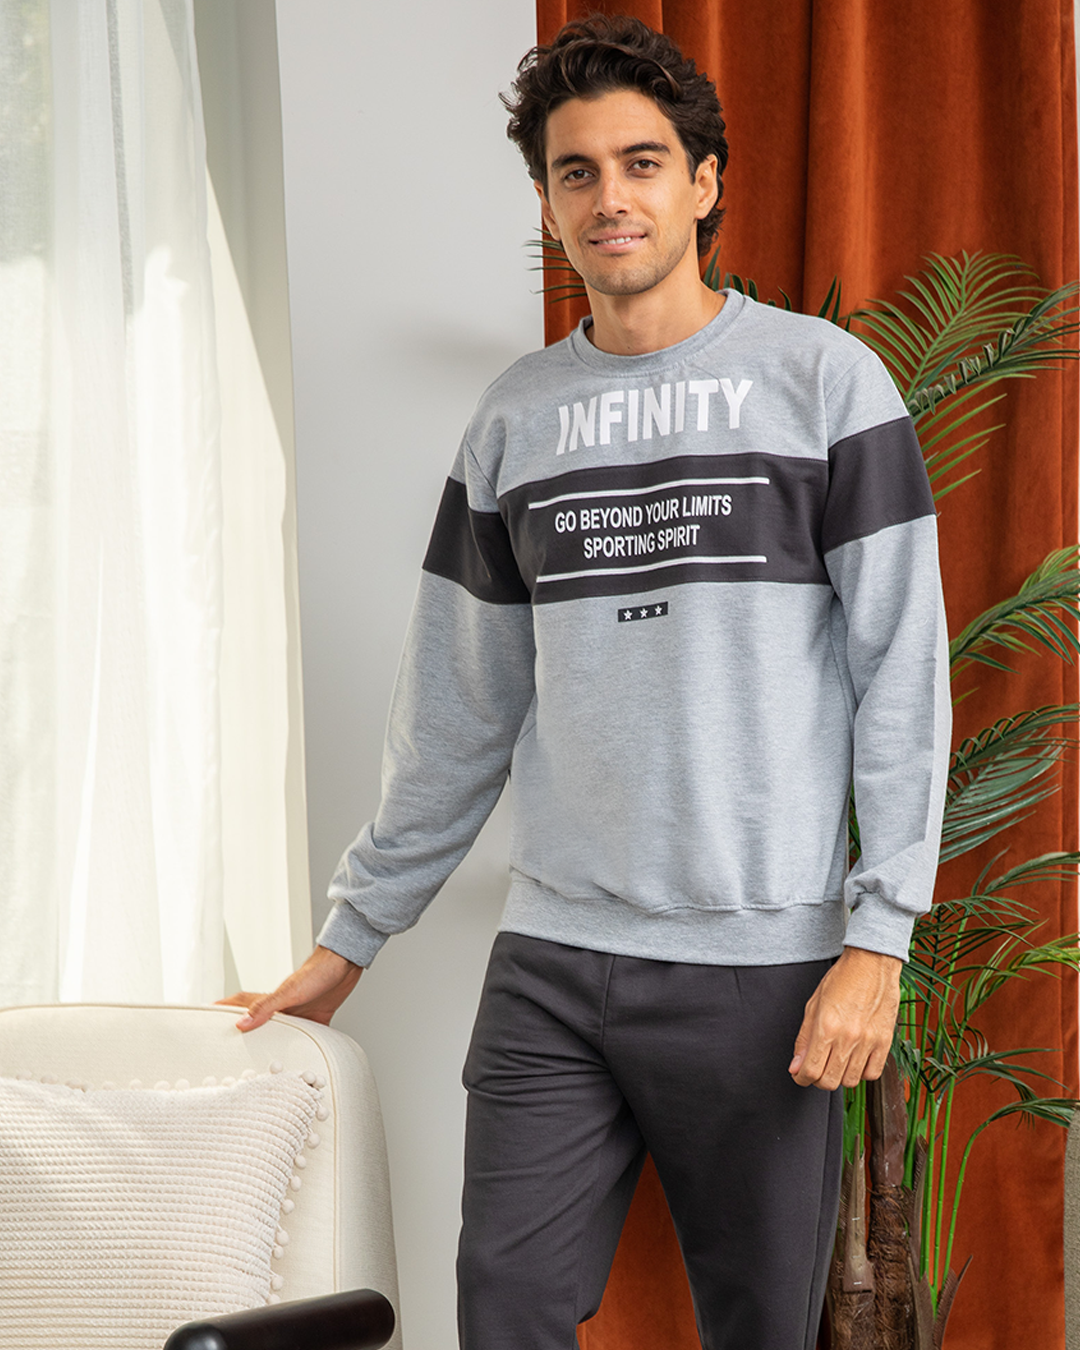 Infinity men's pajamas, a cut in the sleeve